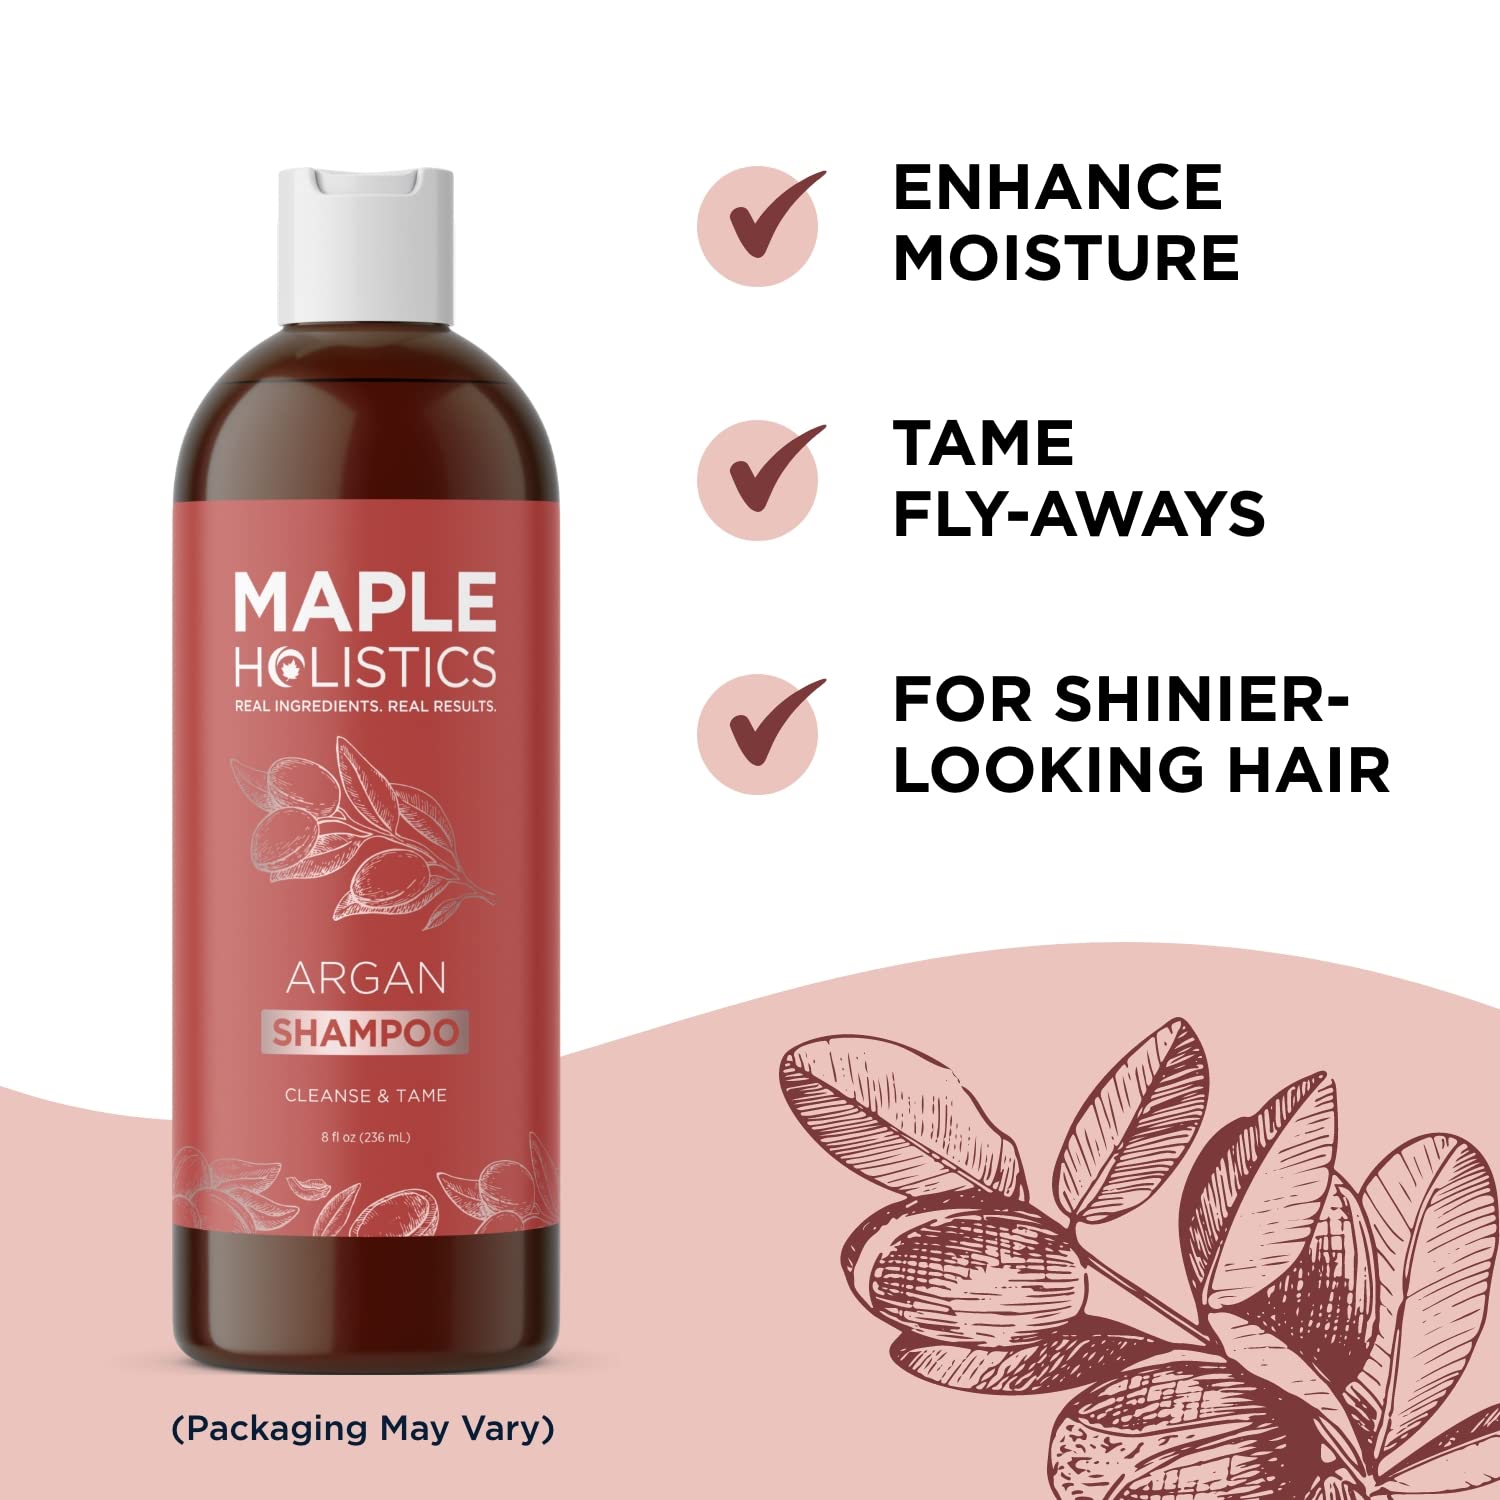 Argan Oil Shampoo for Dry Hair - Sulfate Free Shampoo for Damaged Hair and Frizz with Argan Oil for Hair - Volumizing Shampoo for Hair Shine and Volume Featuring Ultra Moisturizing Natural Oils